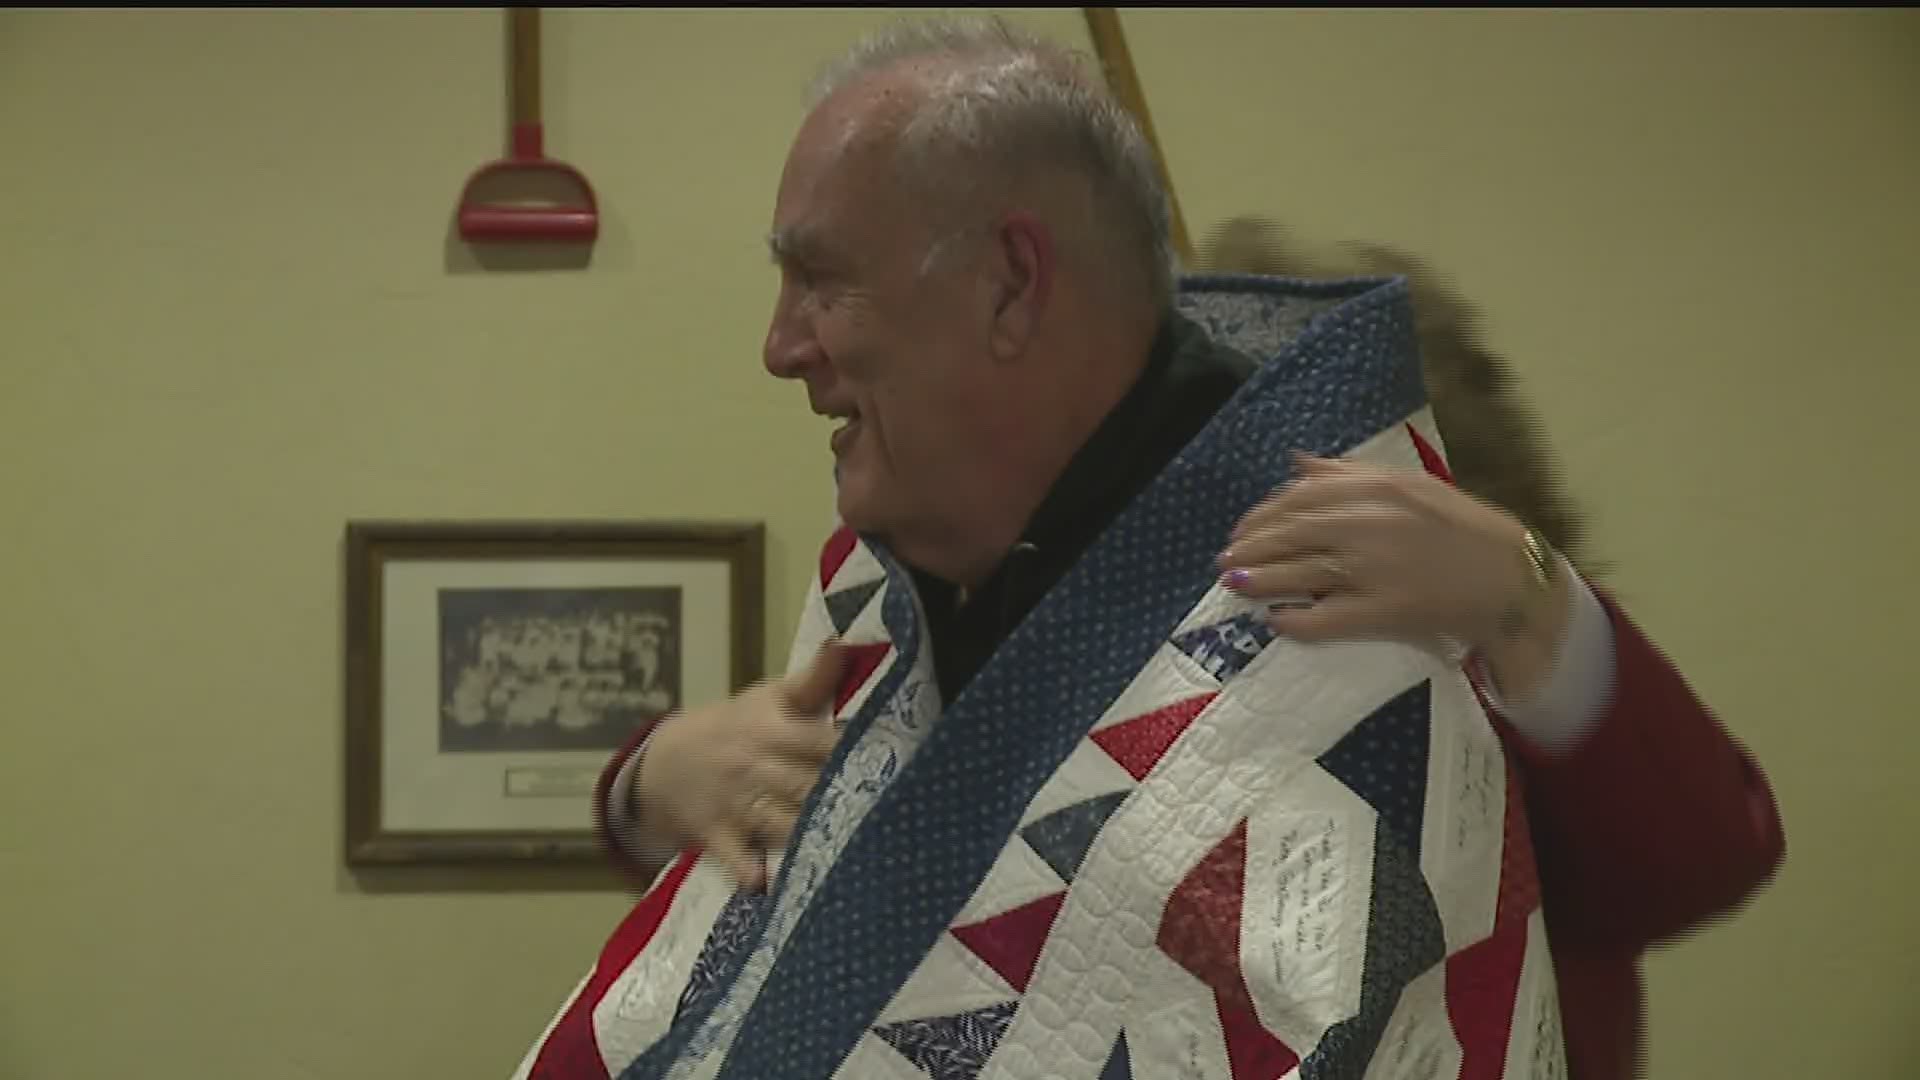 Cumberland county Veteran presented with the comforting gift in honor of his service